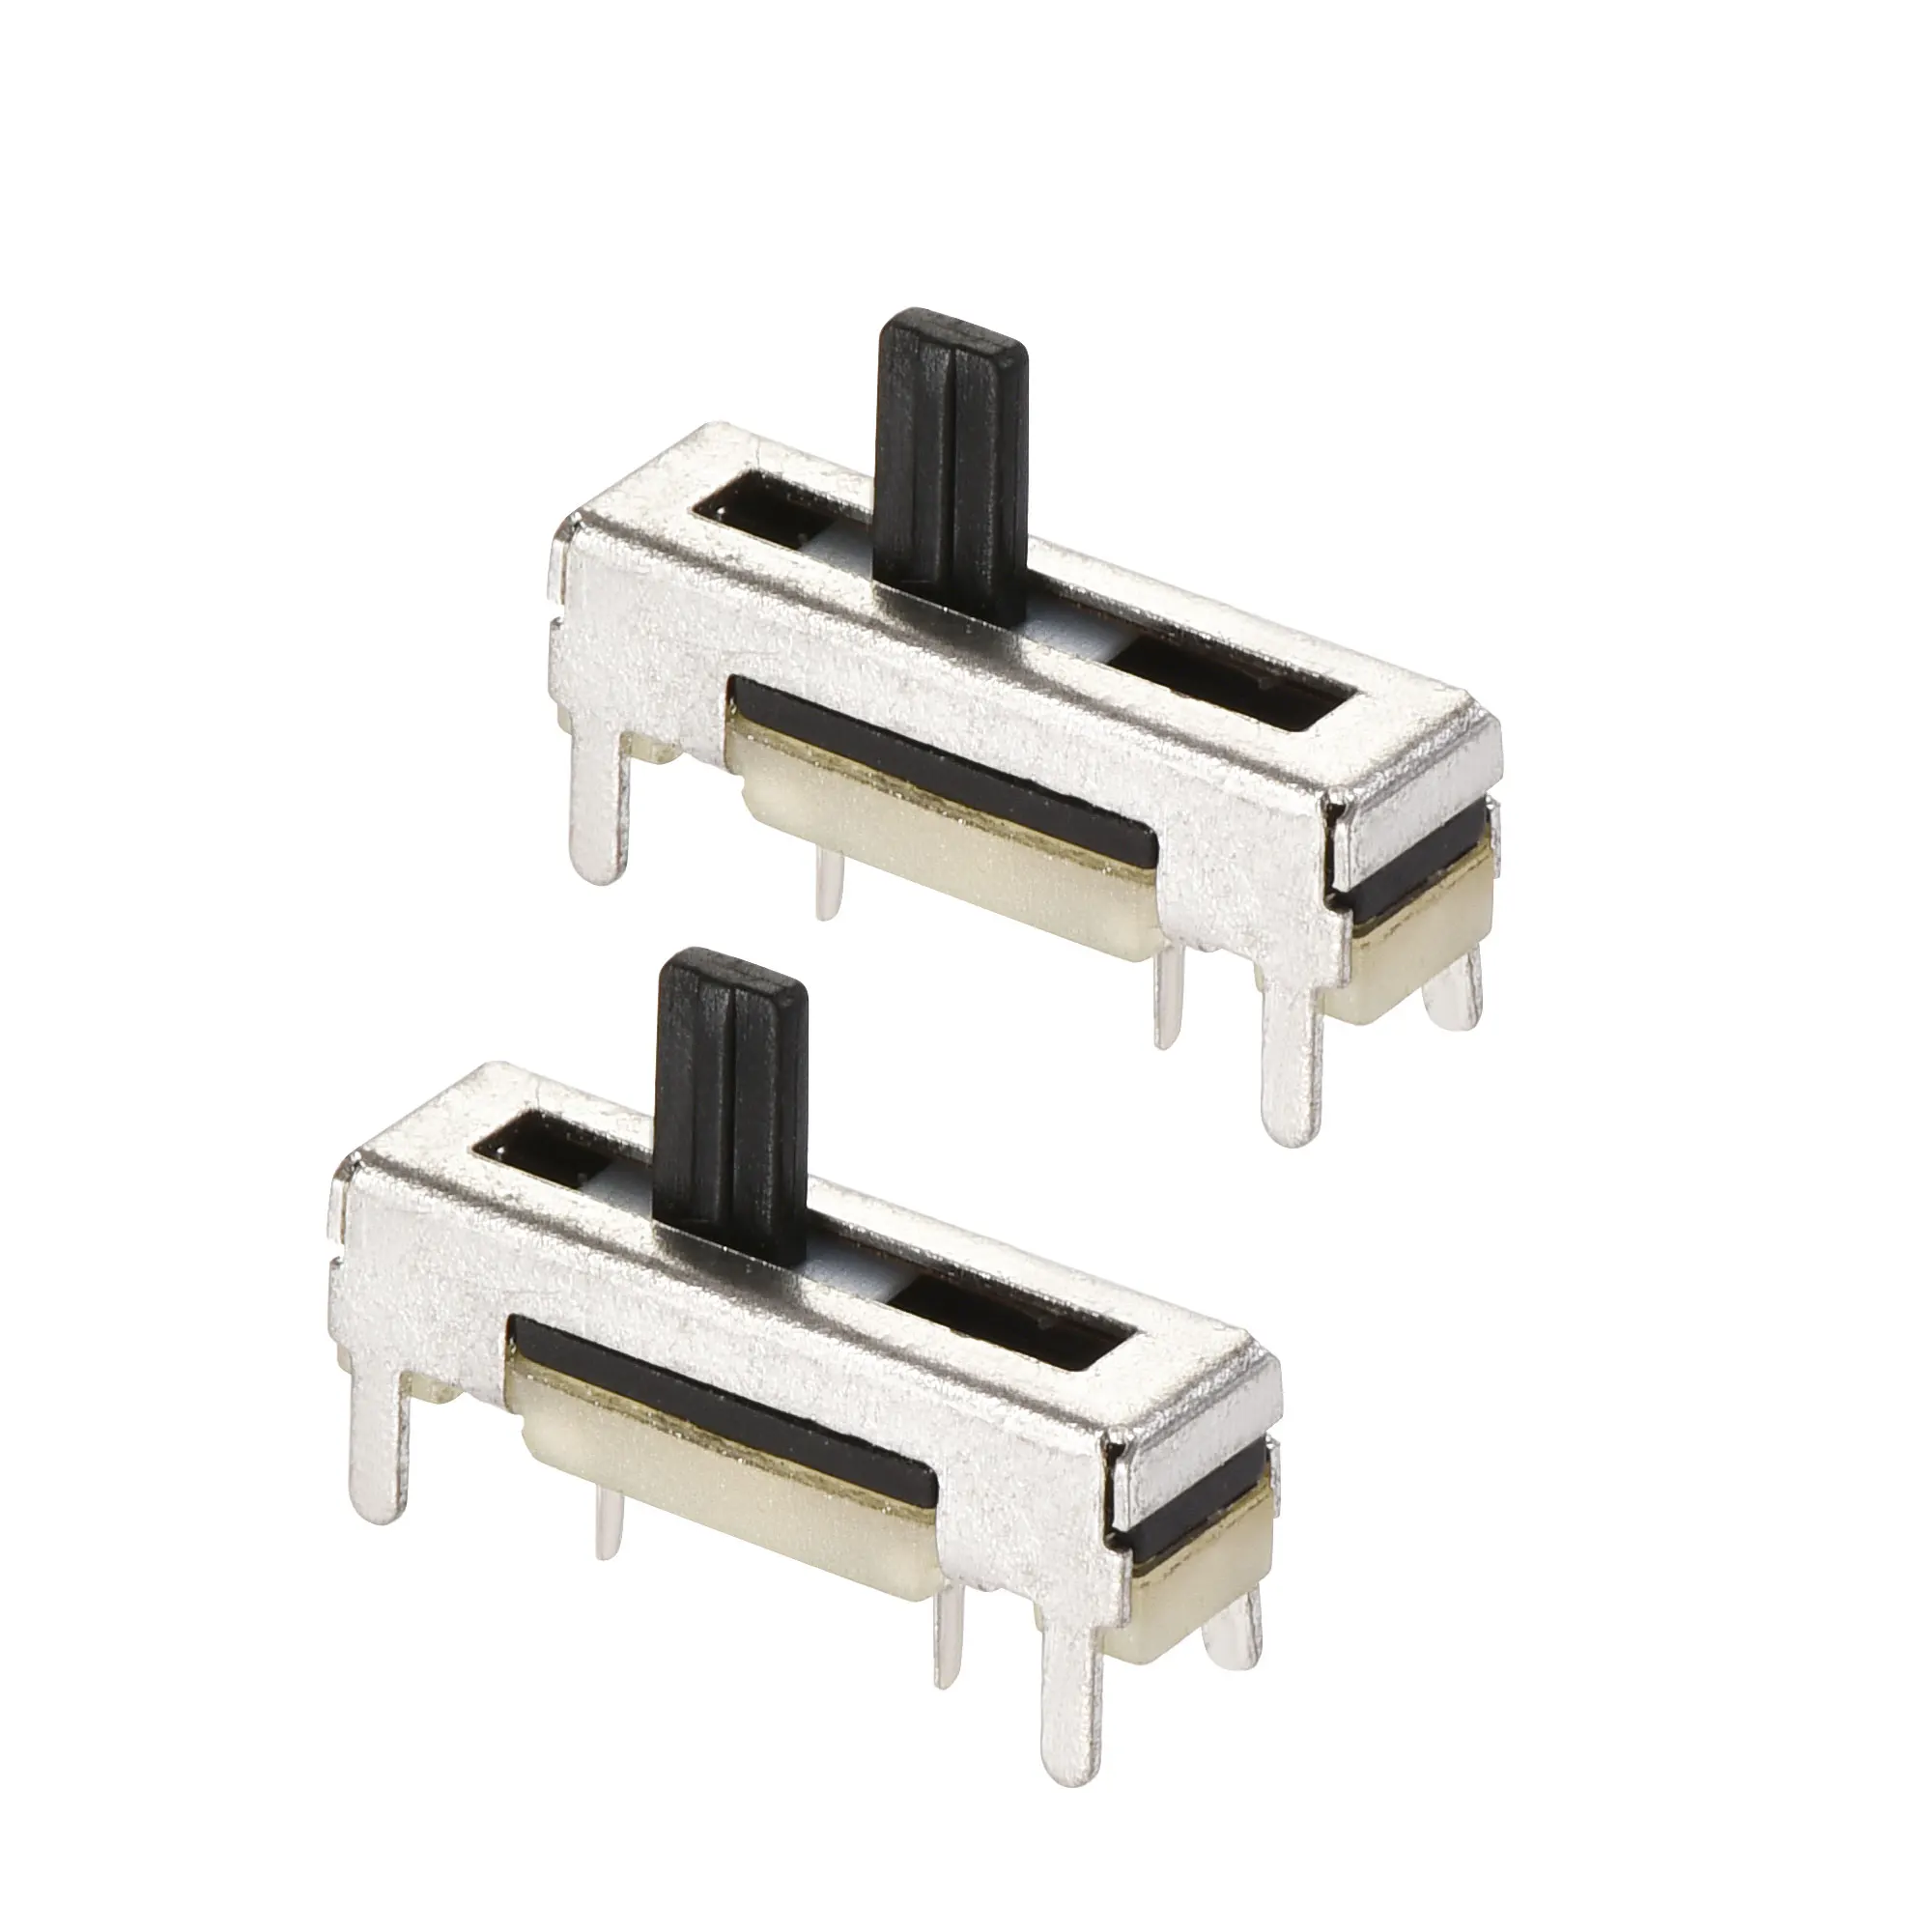 

Uxcell Fader Variable Resistors Mixer 18mm Straight Slide Potentiometer B1K Ohm Single Channel 2 Pcs